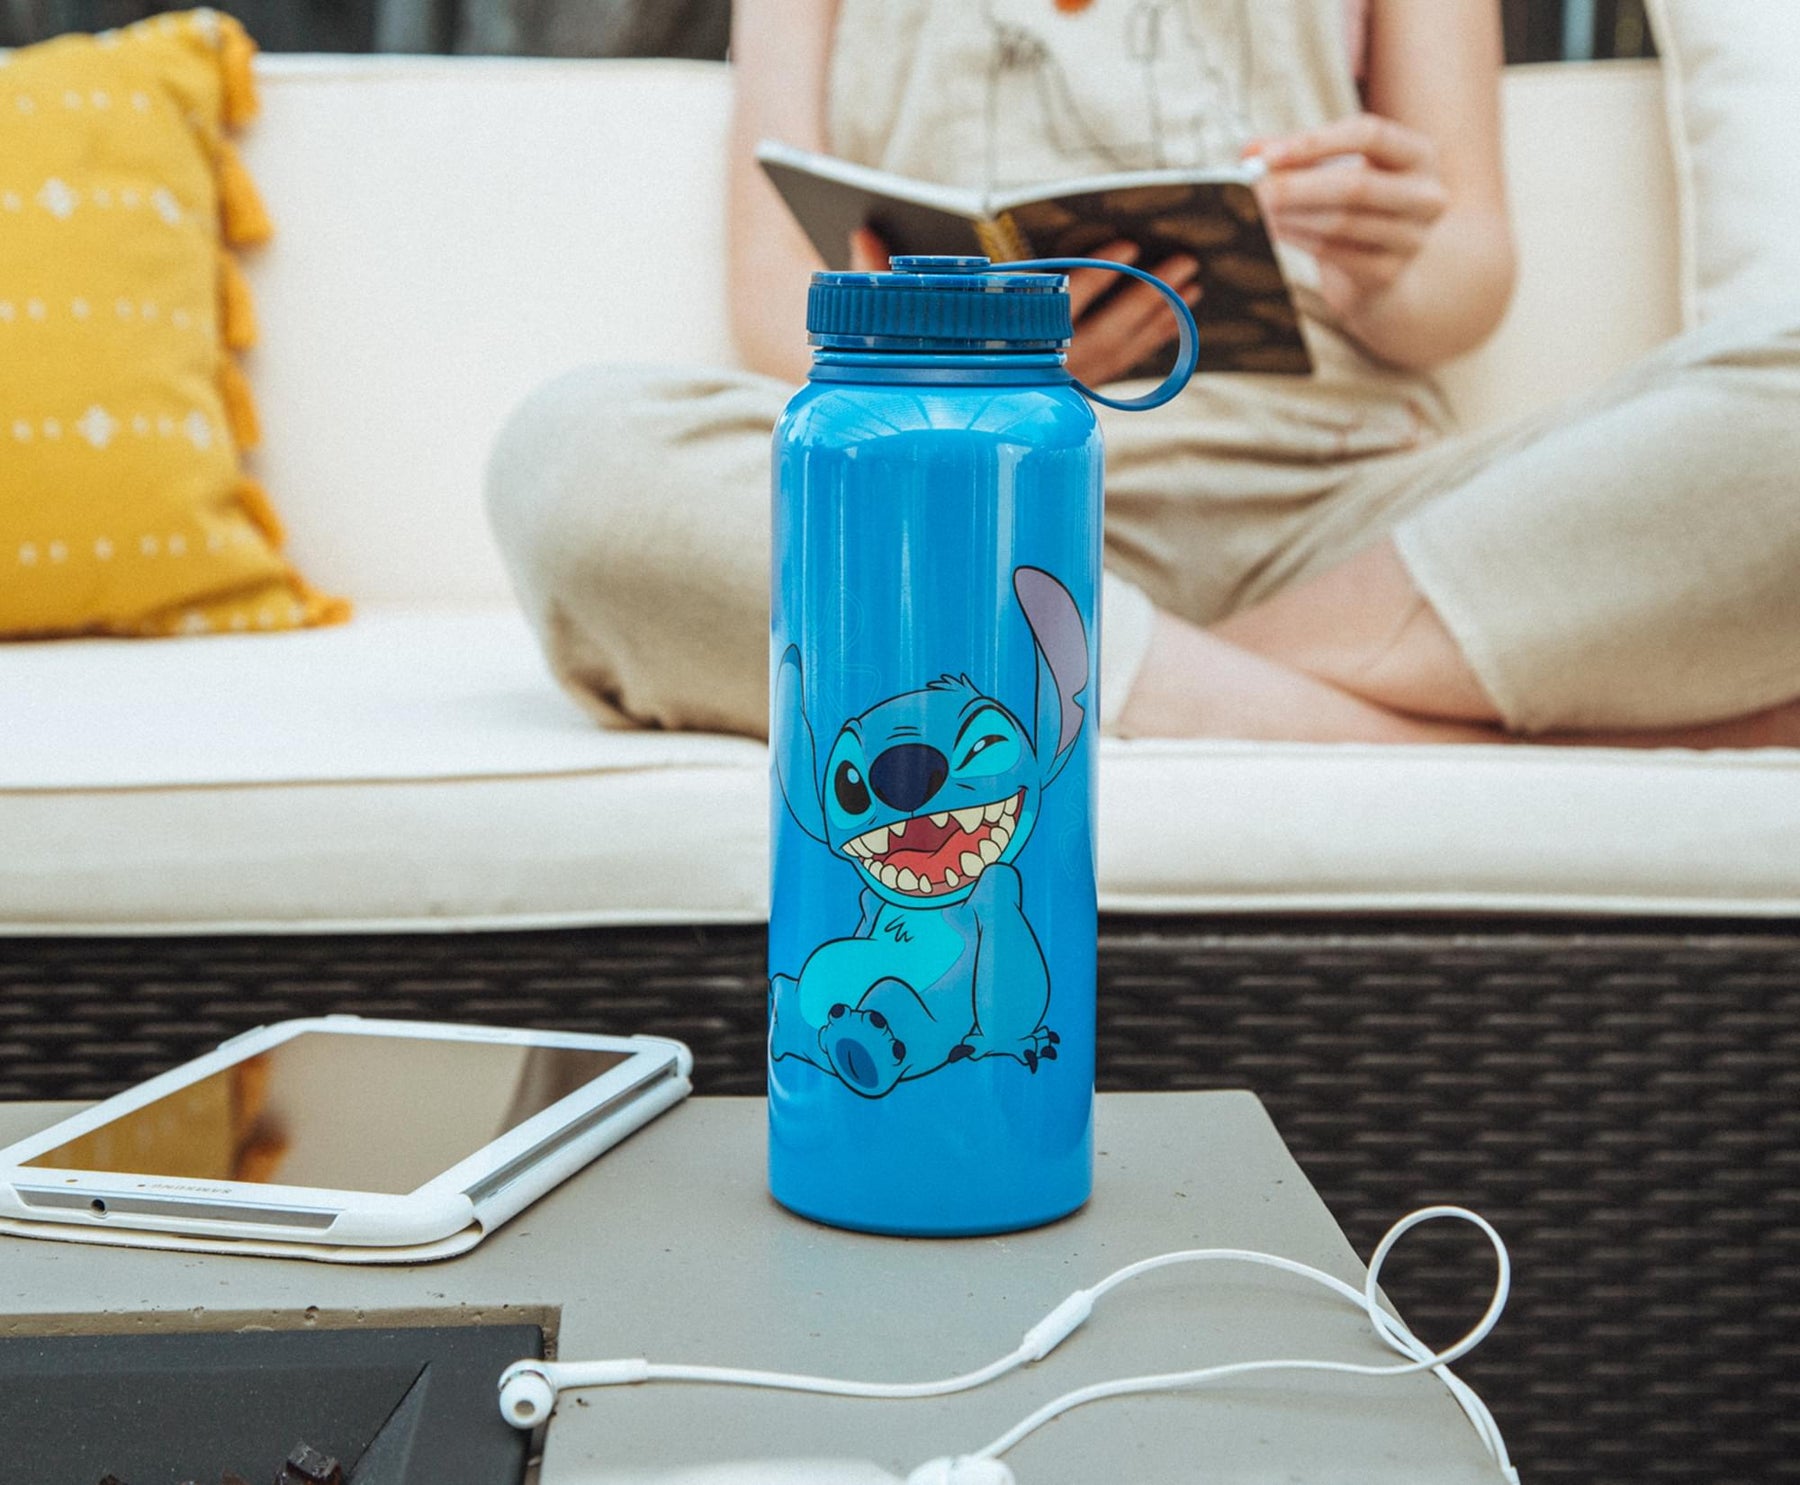 Disney Lilo & Stitch "Ohana Means Family" 42-Ounce Stainless Steel Water Bottle